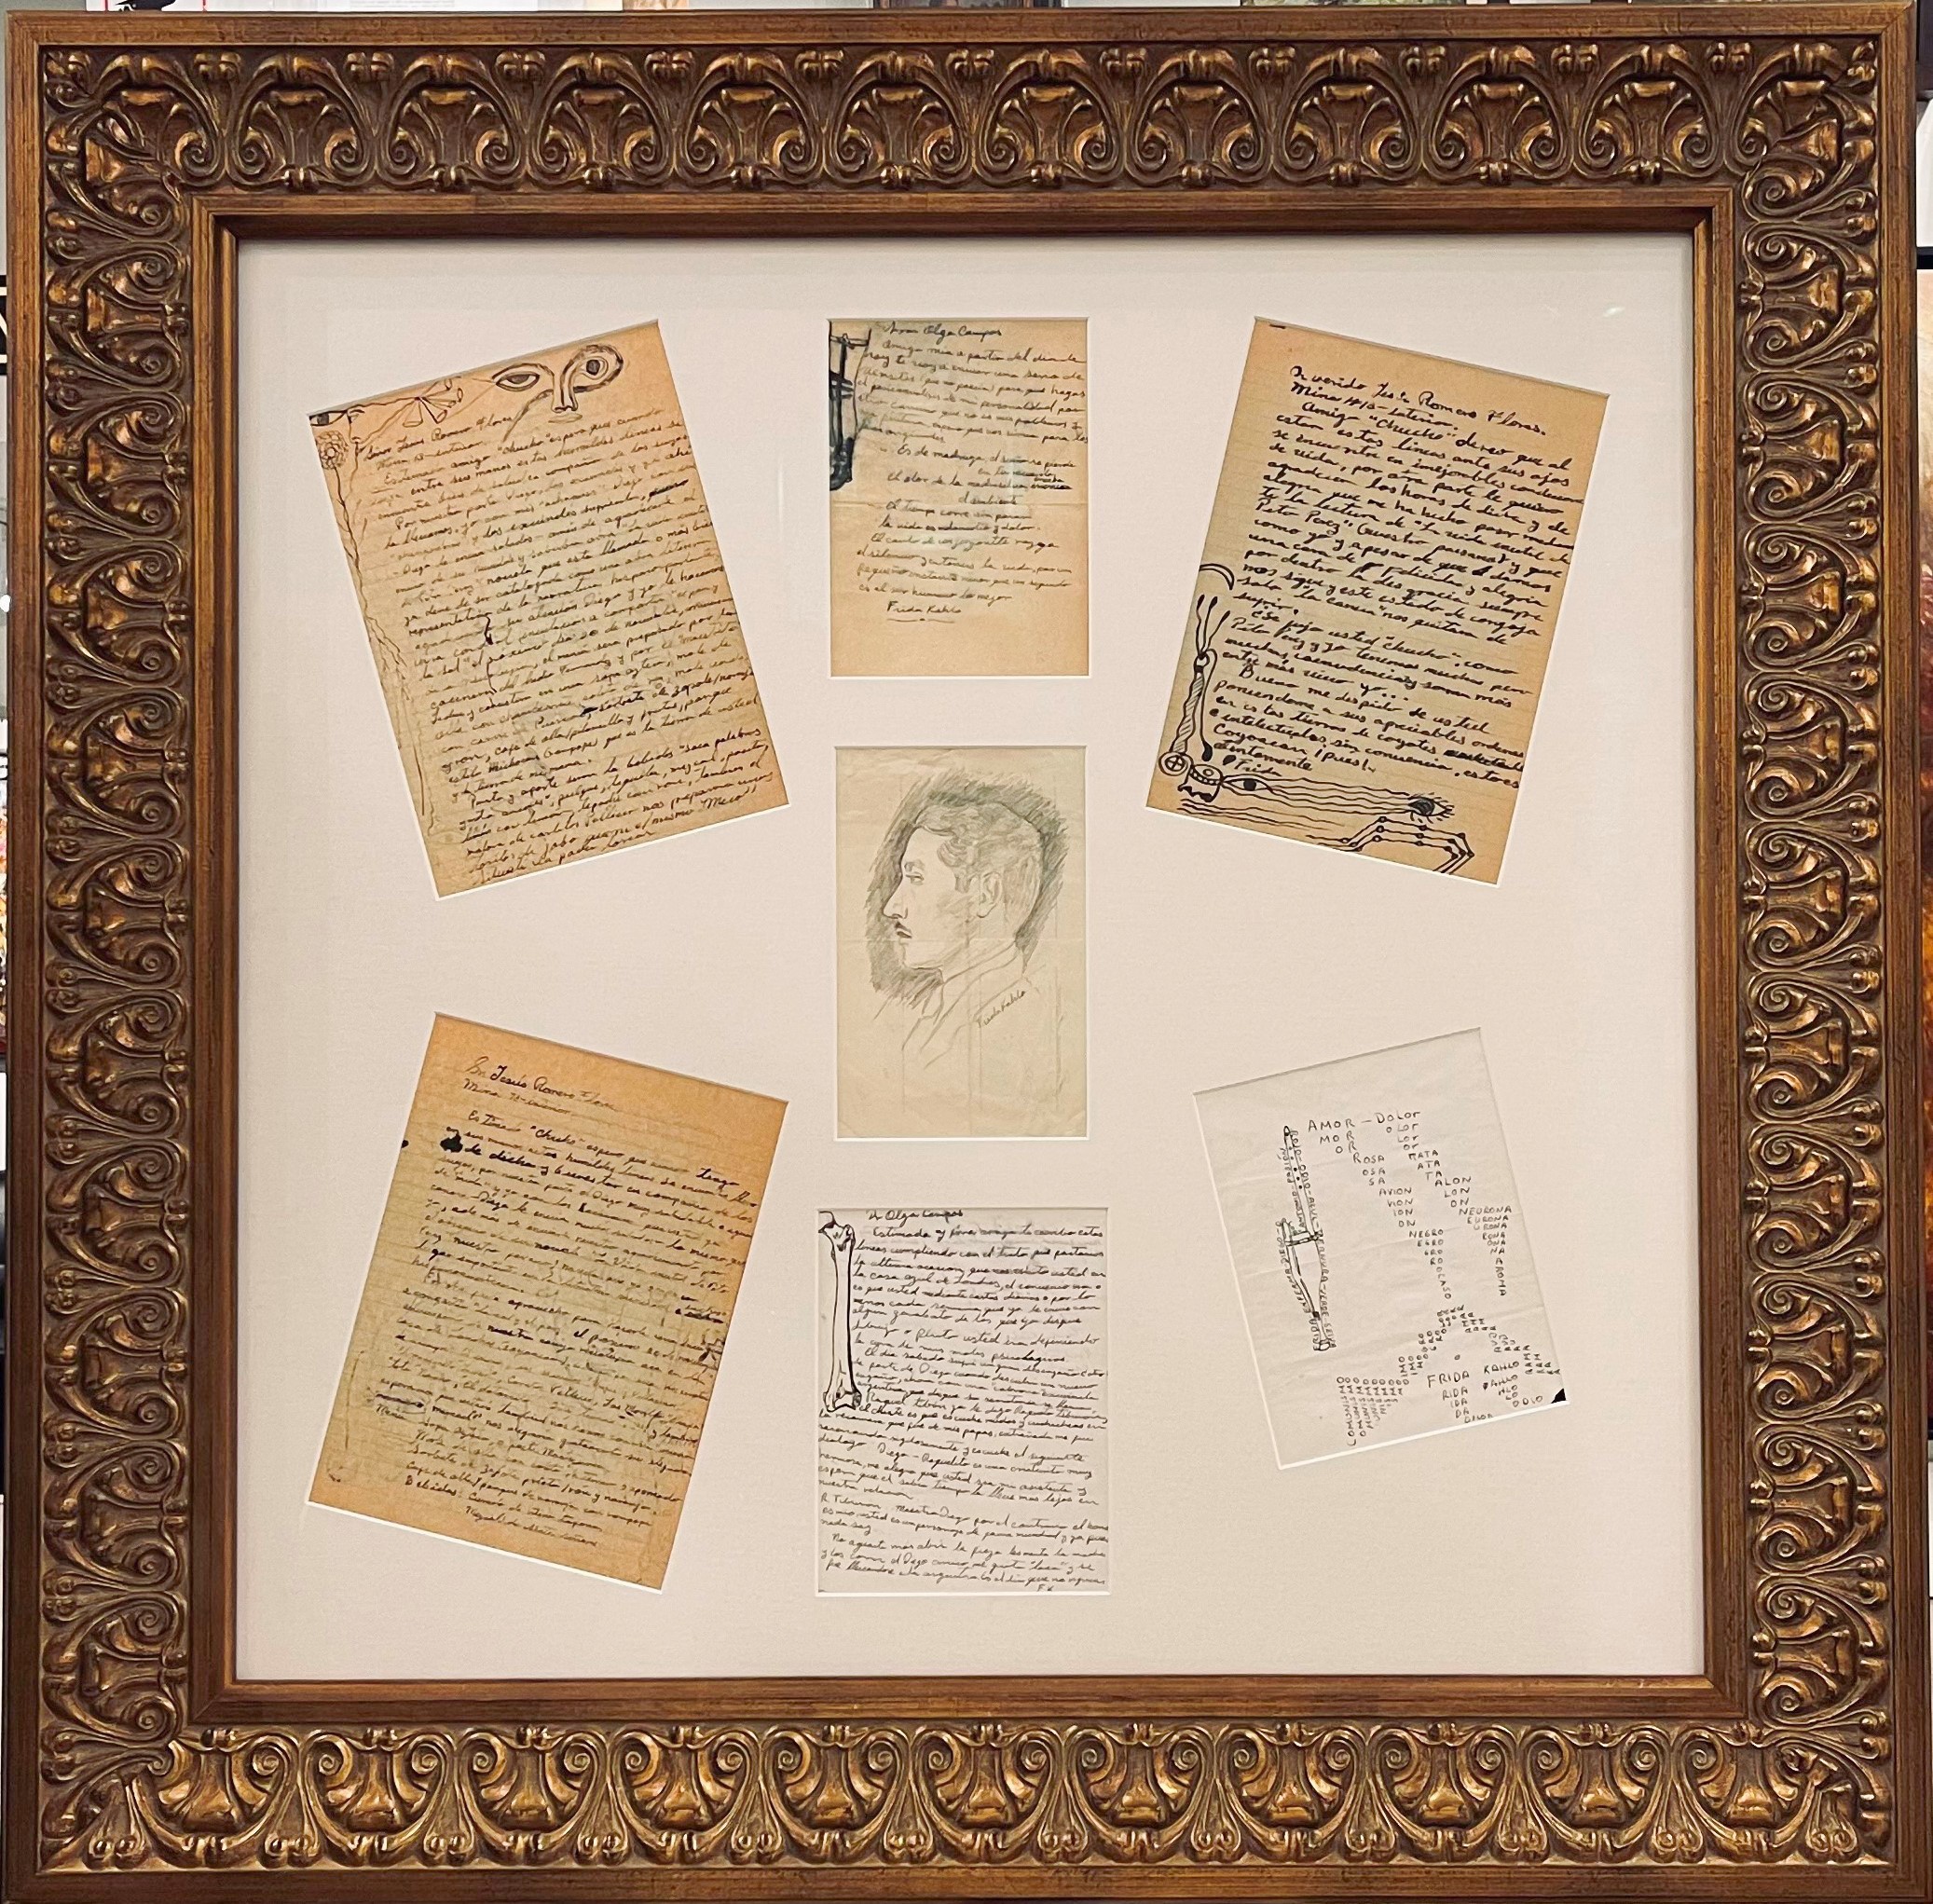 Frida Kahlo-Handwritten Letters Sketches Drawings Ⅱ- Framed Front 38.5x38.5 inches.